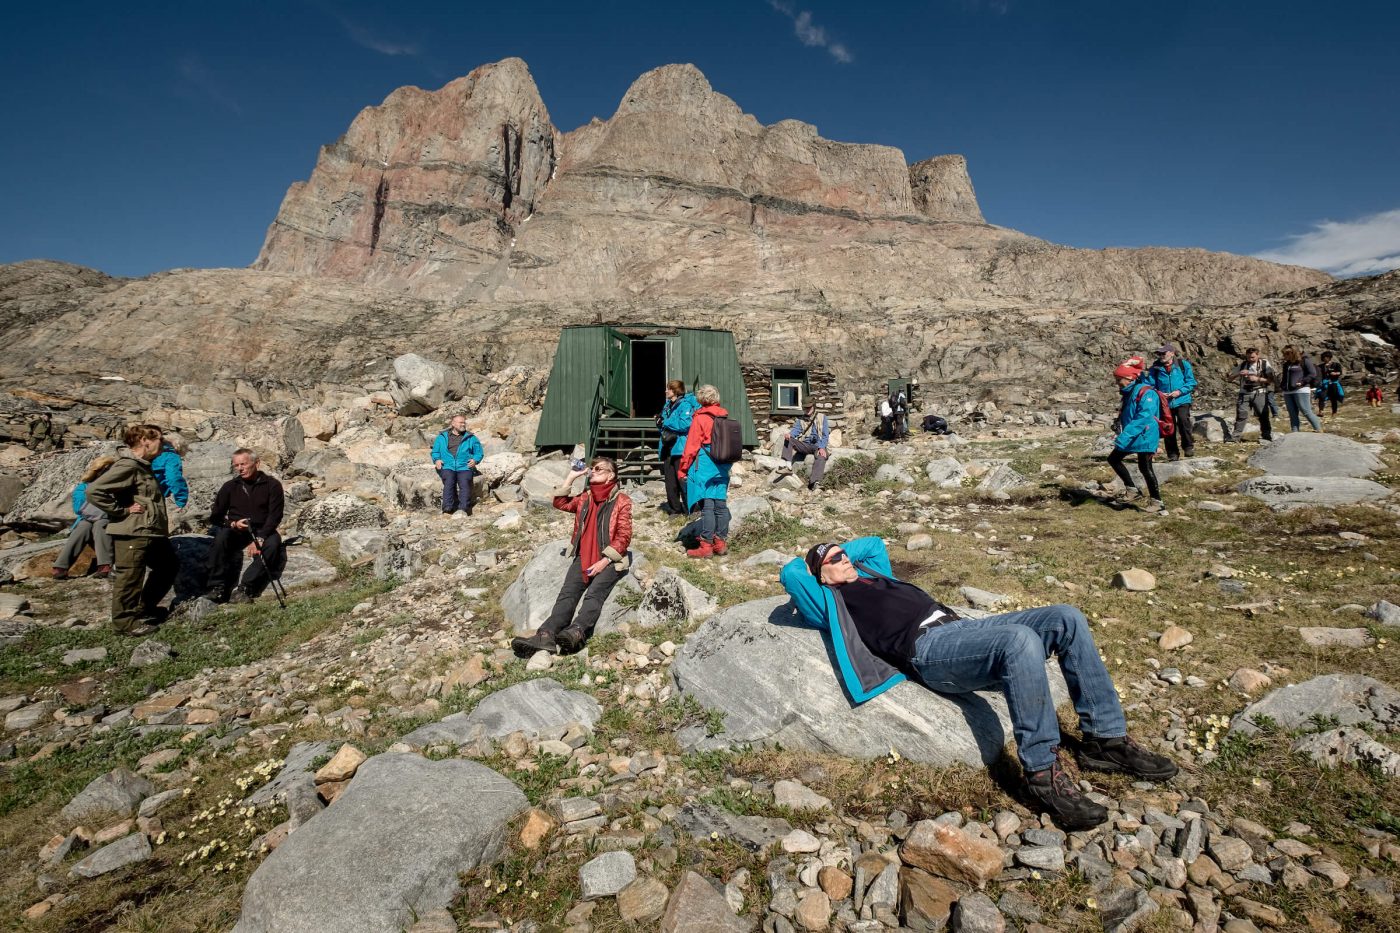 Cruise guests from MS Fram relaxing outside the Santa Claus cabin in Uummannaq in Greenland. By Mads Pihl